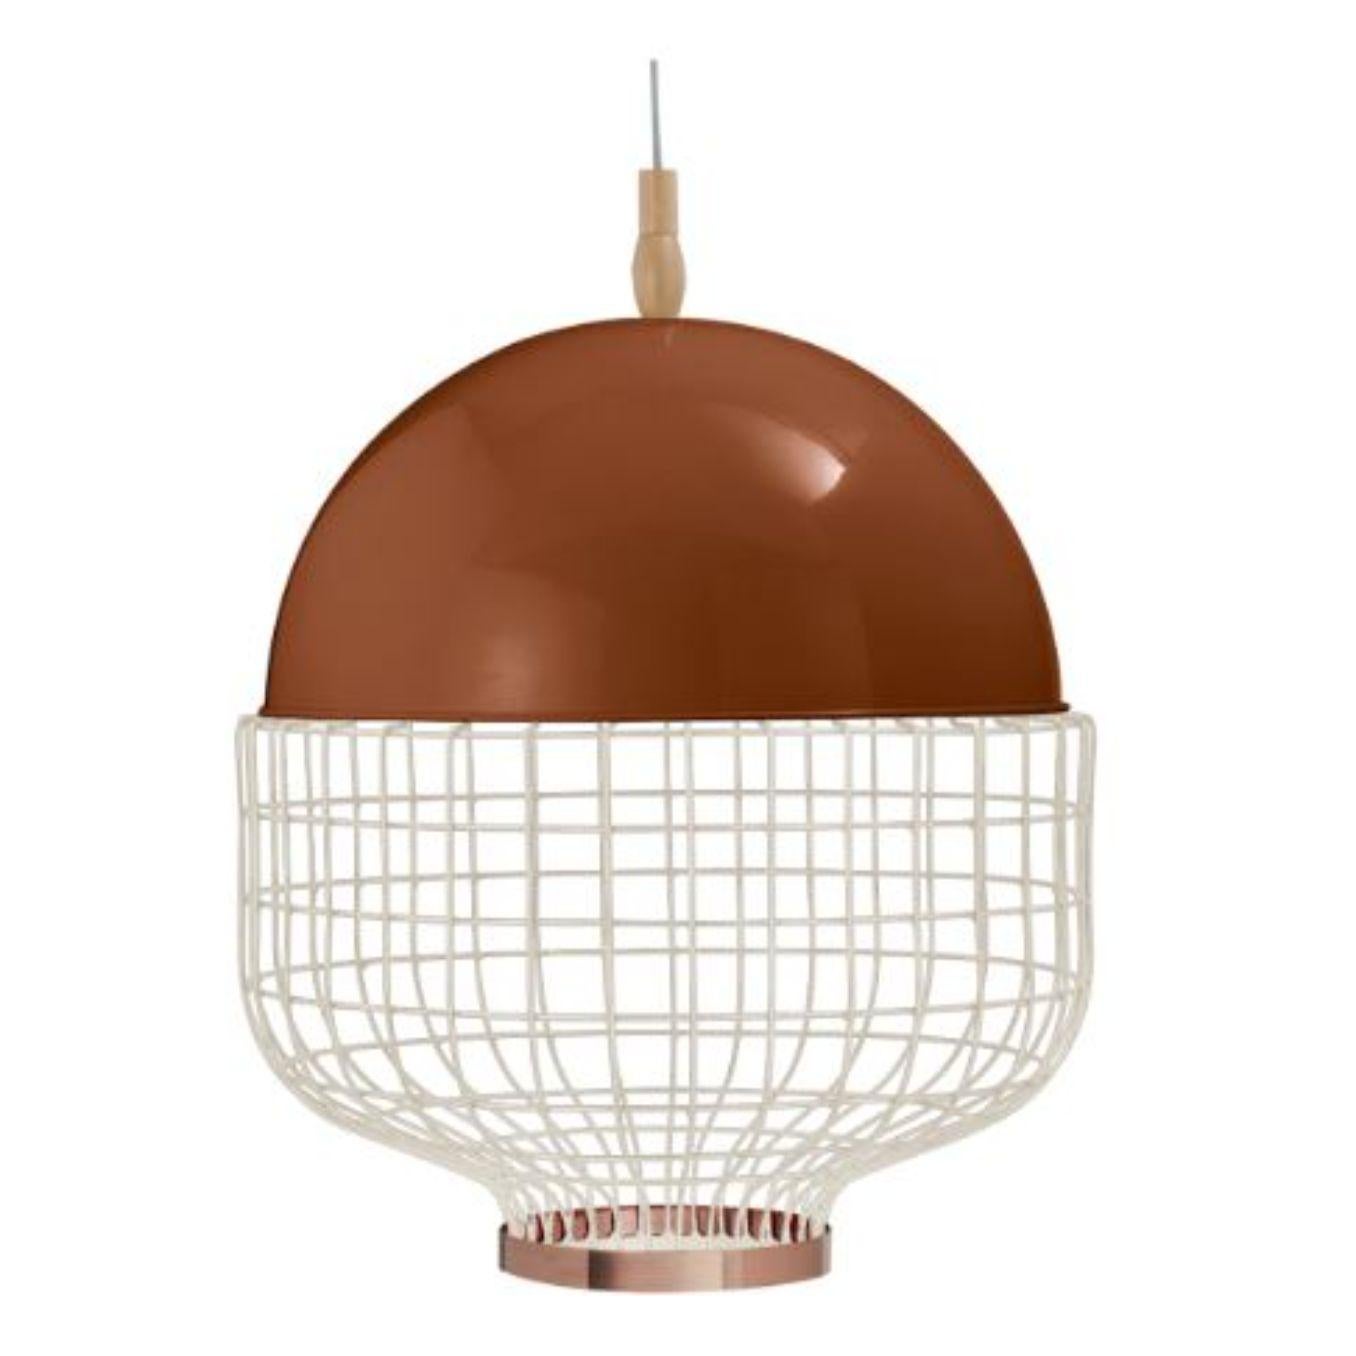 Copper magnolia suspension lamp with brass ring by Dooq.
Dimensions: W 65 x D 65 x H 68 cm.
Materials: lacquered metal, polished or brushed metal, copper.
Also available in different colours and materials.

Information:
230V/50Hz
E27/1x20W